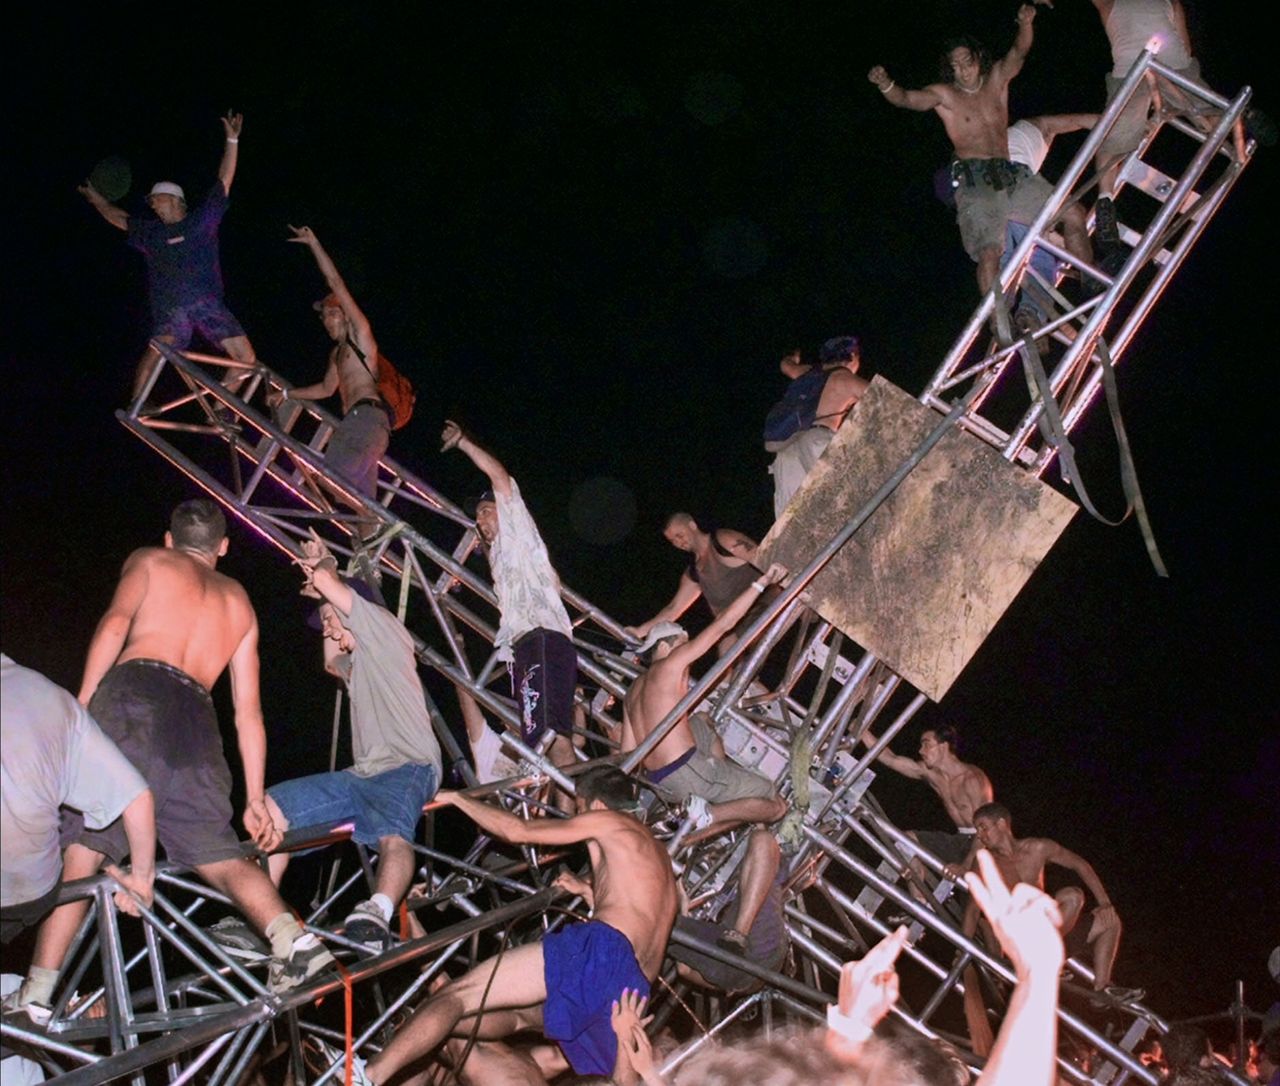 A group of young people climb to the top of the sound tower and knock it down in footage from the music festival shown in "Train Wreck: Woodstock '99."